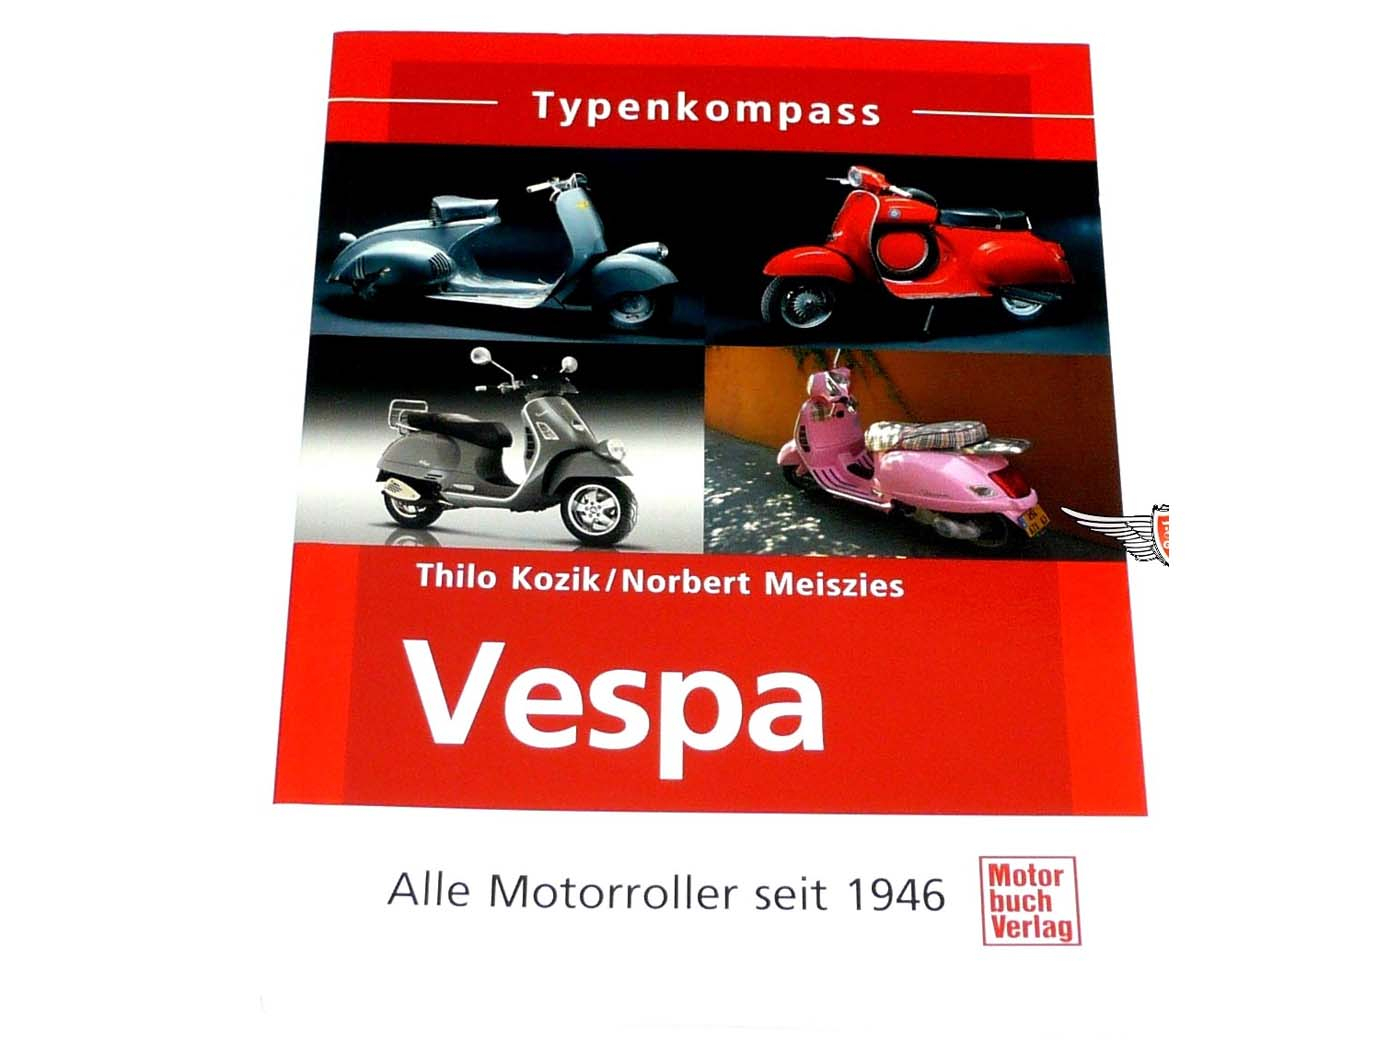 Type Compass, Reference Book For Vespa